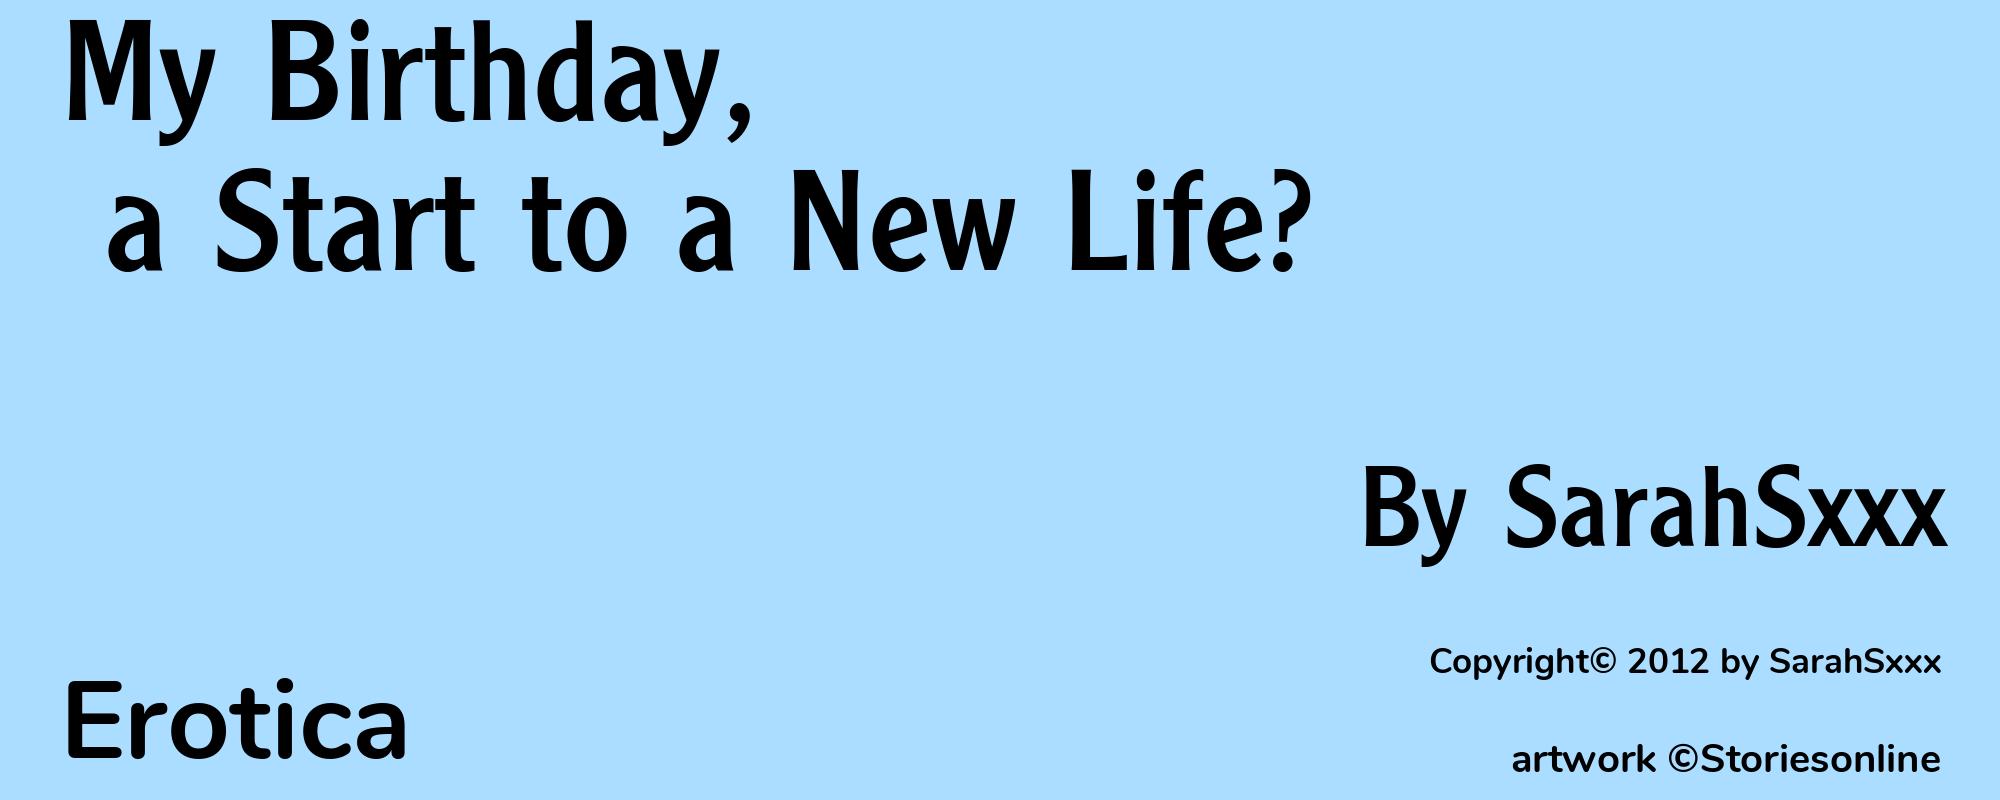 My Birthday, a Start to a New Life? - Cover